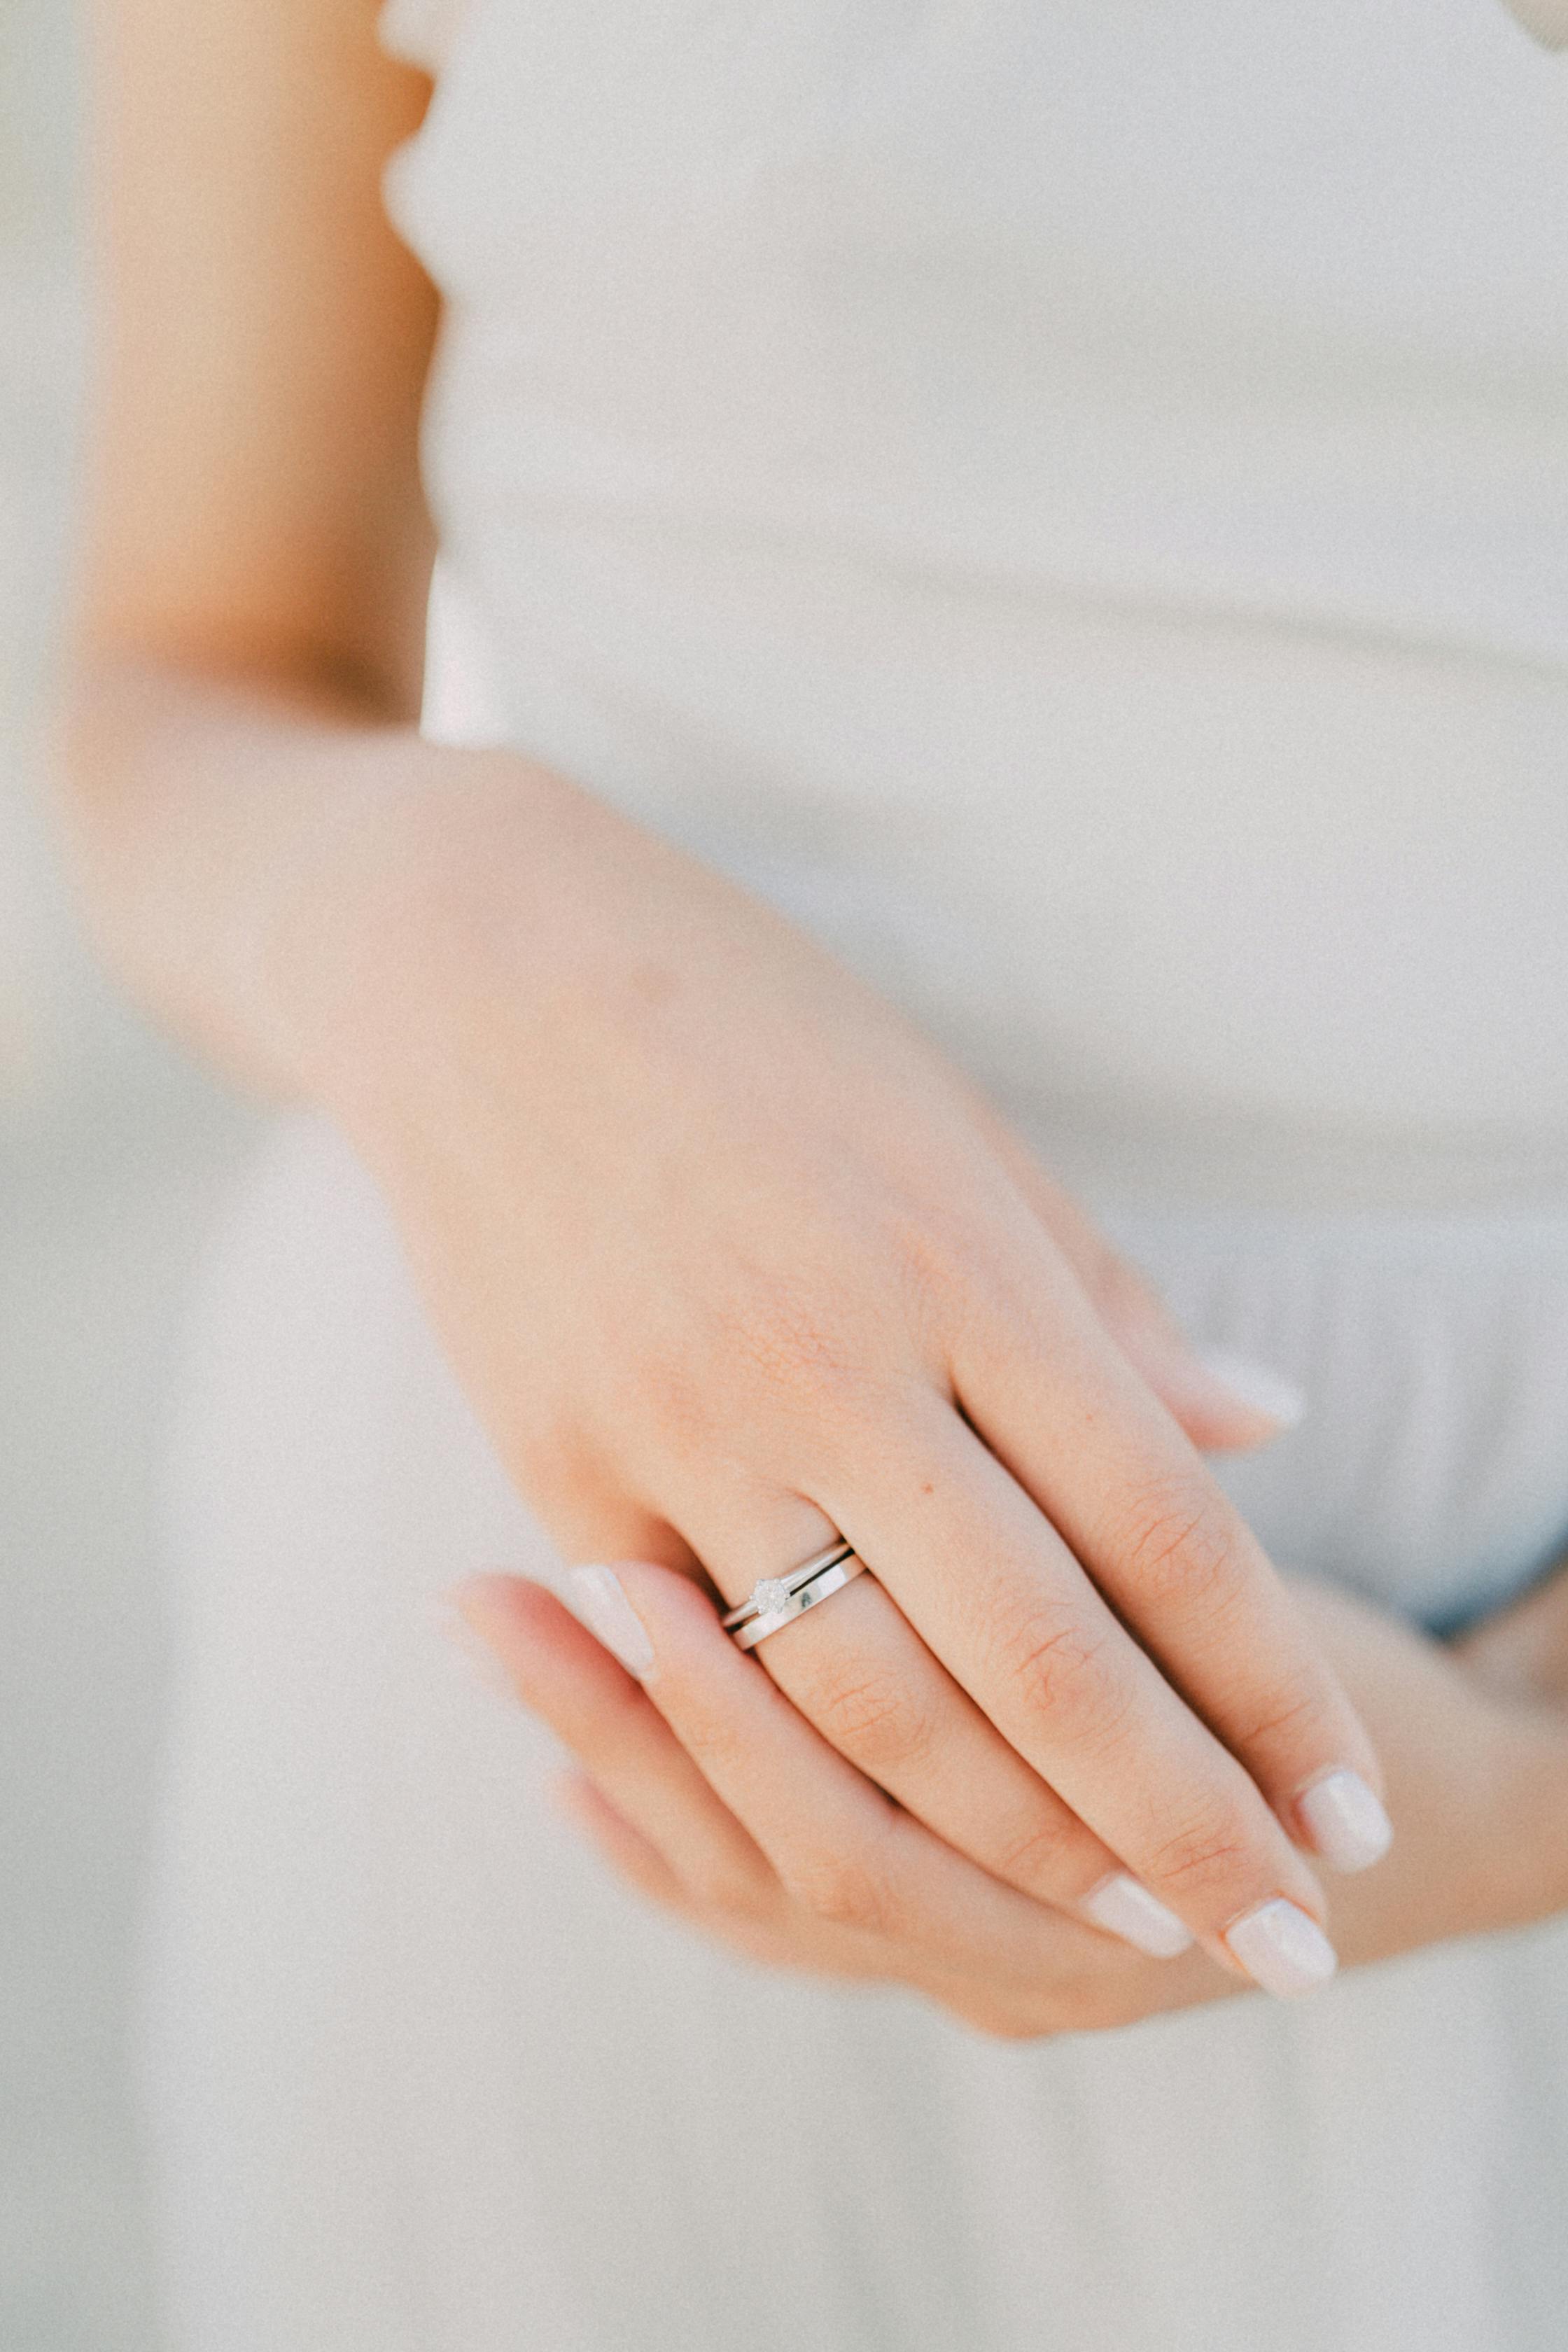 Wedding Ring Hands Stock Photos and Images - 123RF